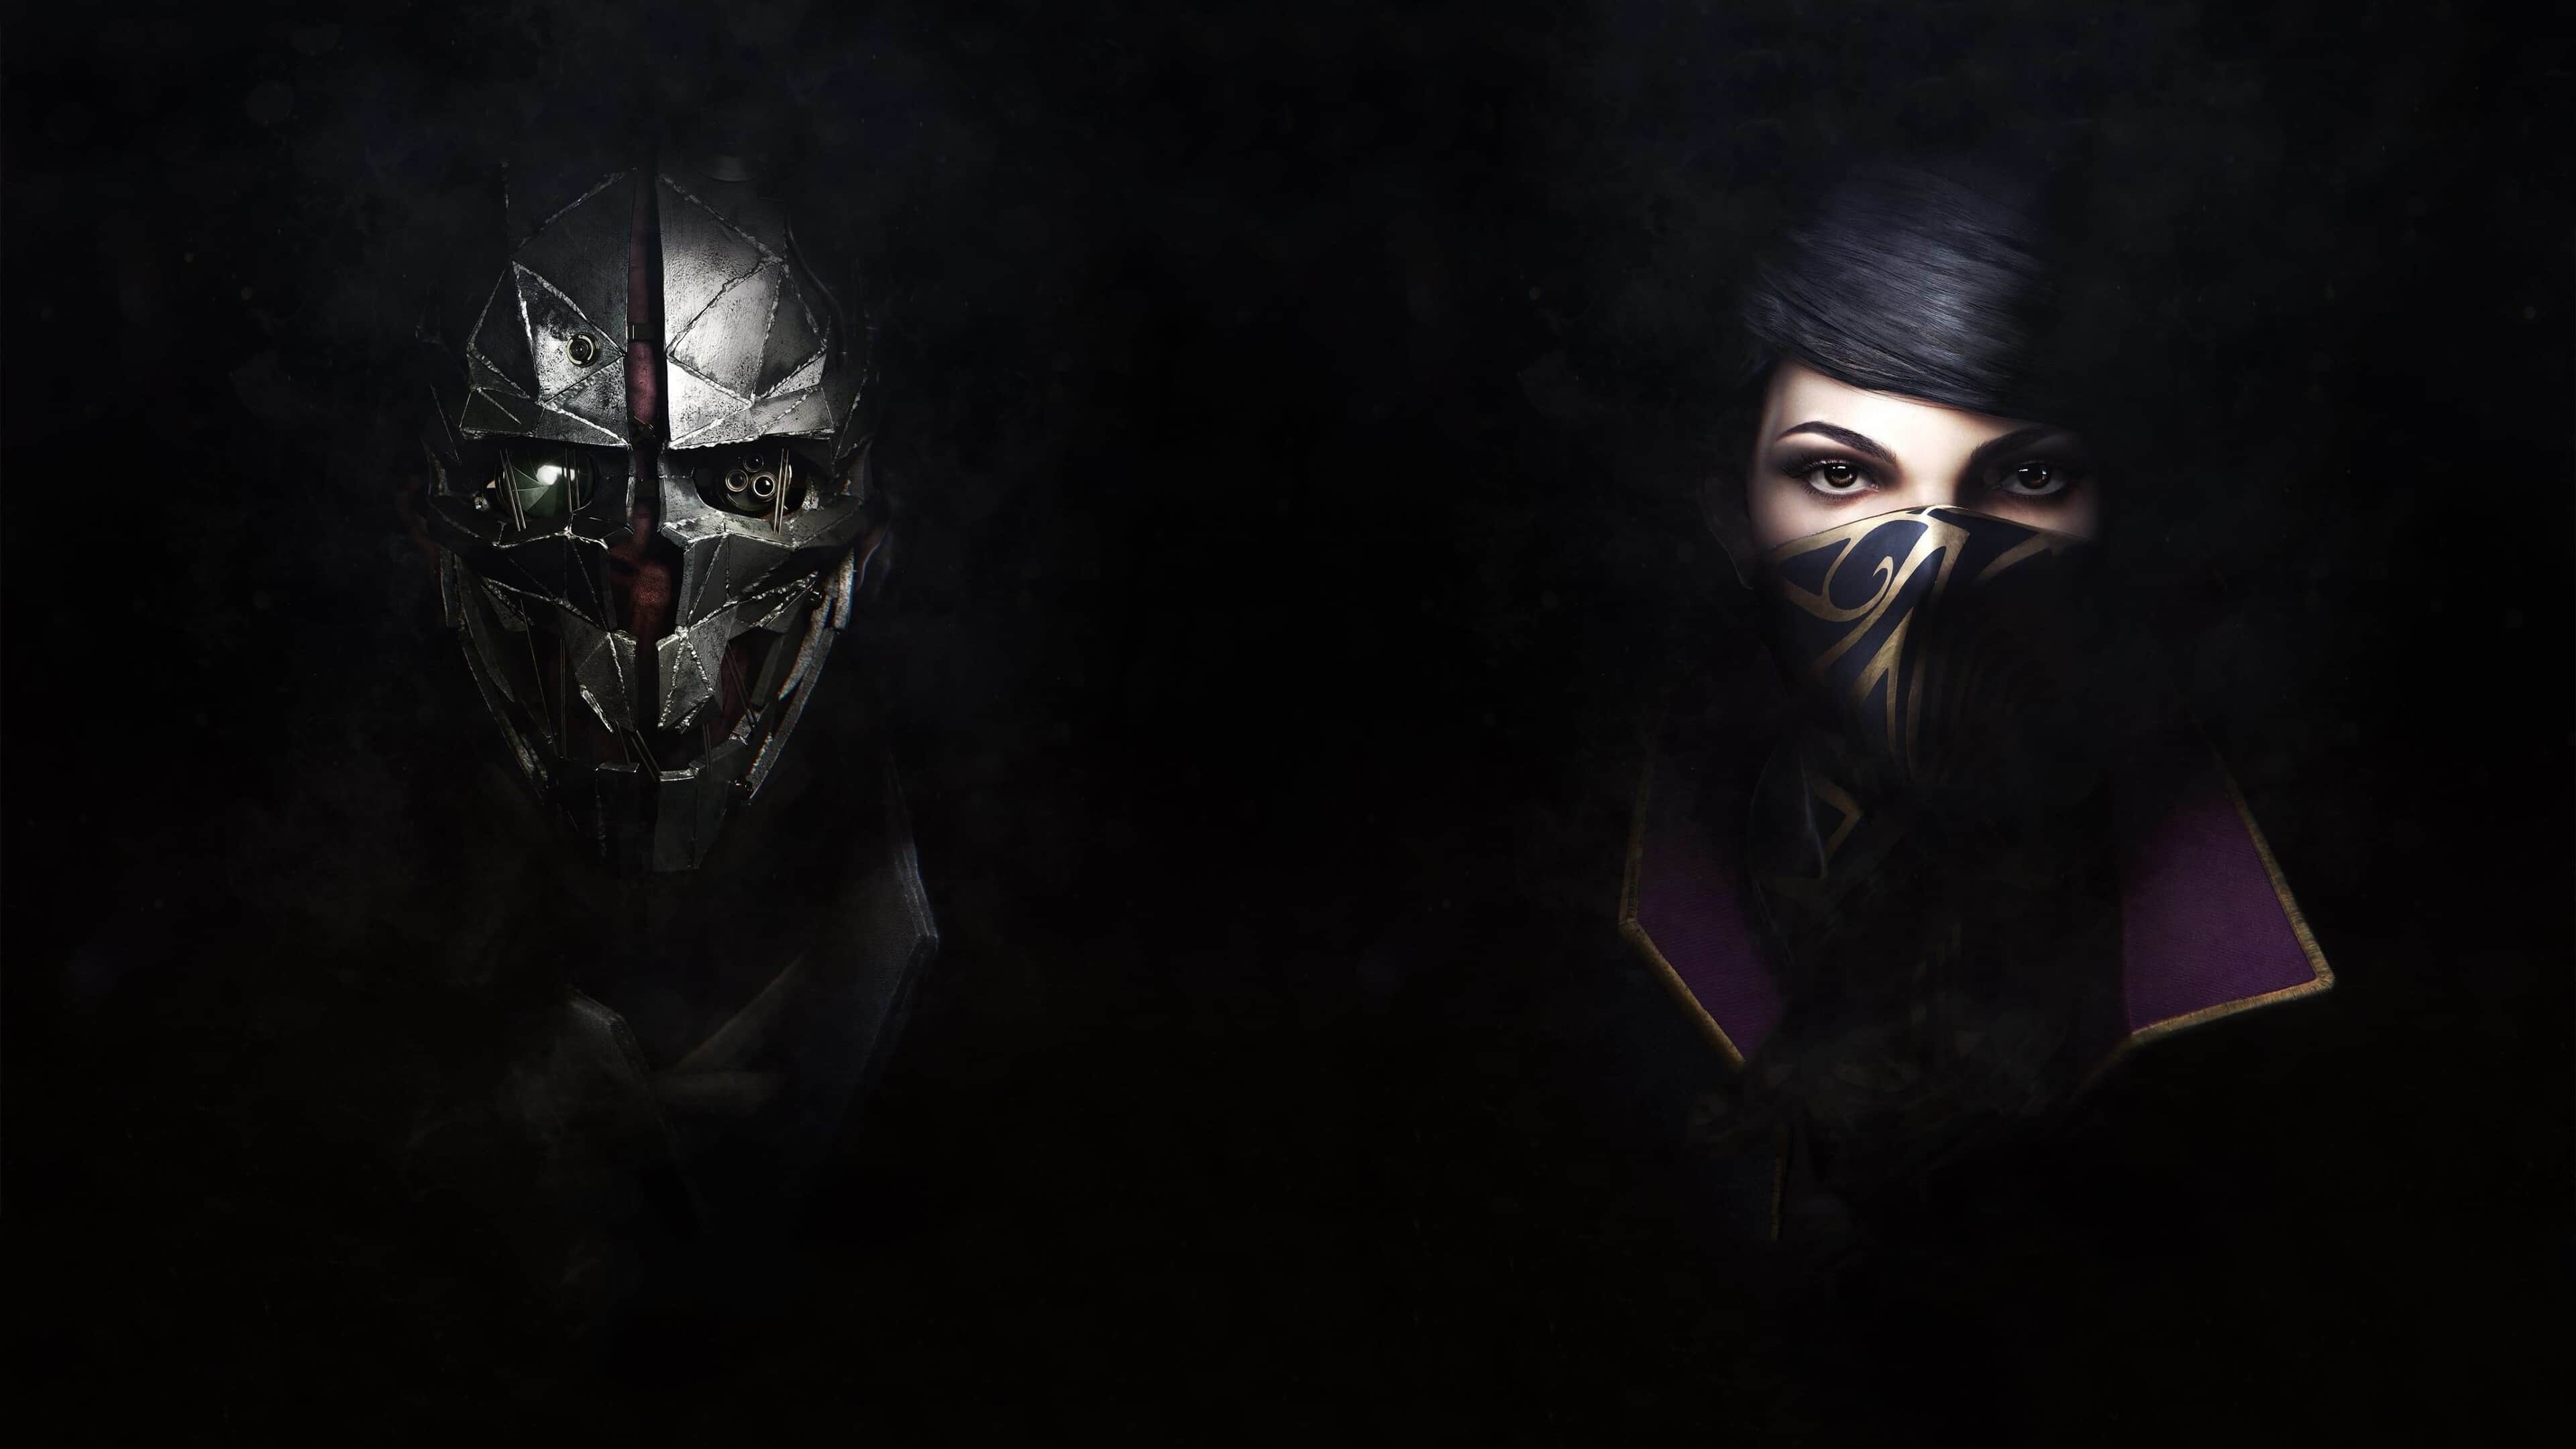 Dishonored: Emily and Corvo, Game character. 3840x2160 4K Wallpaper.